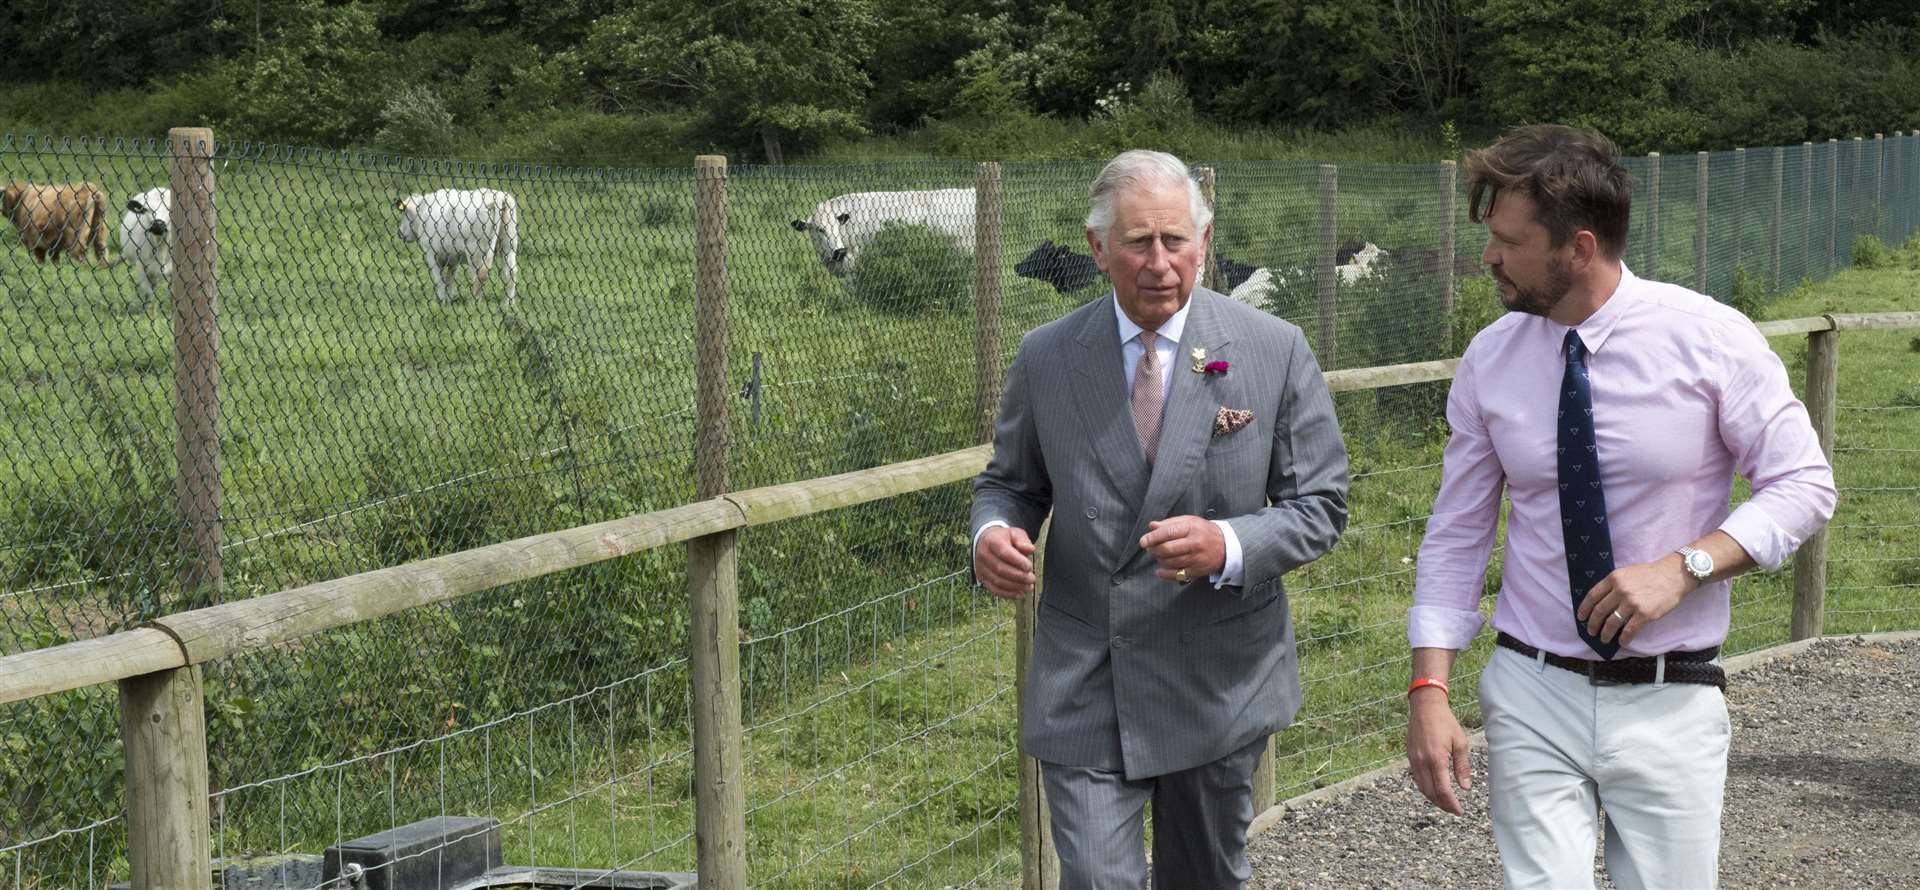 The then-Prince of Wales with Jimmy Doherty during a visit to Jimmy’s Farm in Ipswich (Arthur Edwards/The Sun/PA)